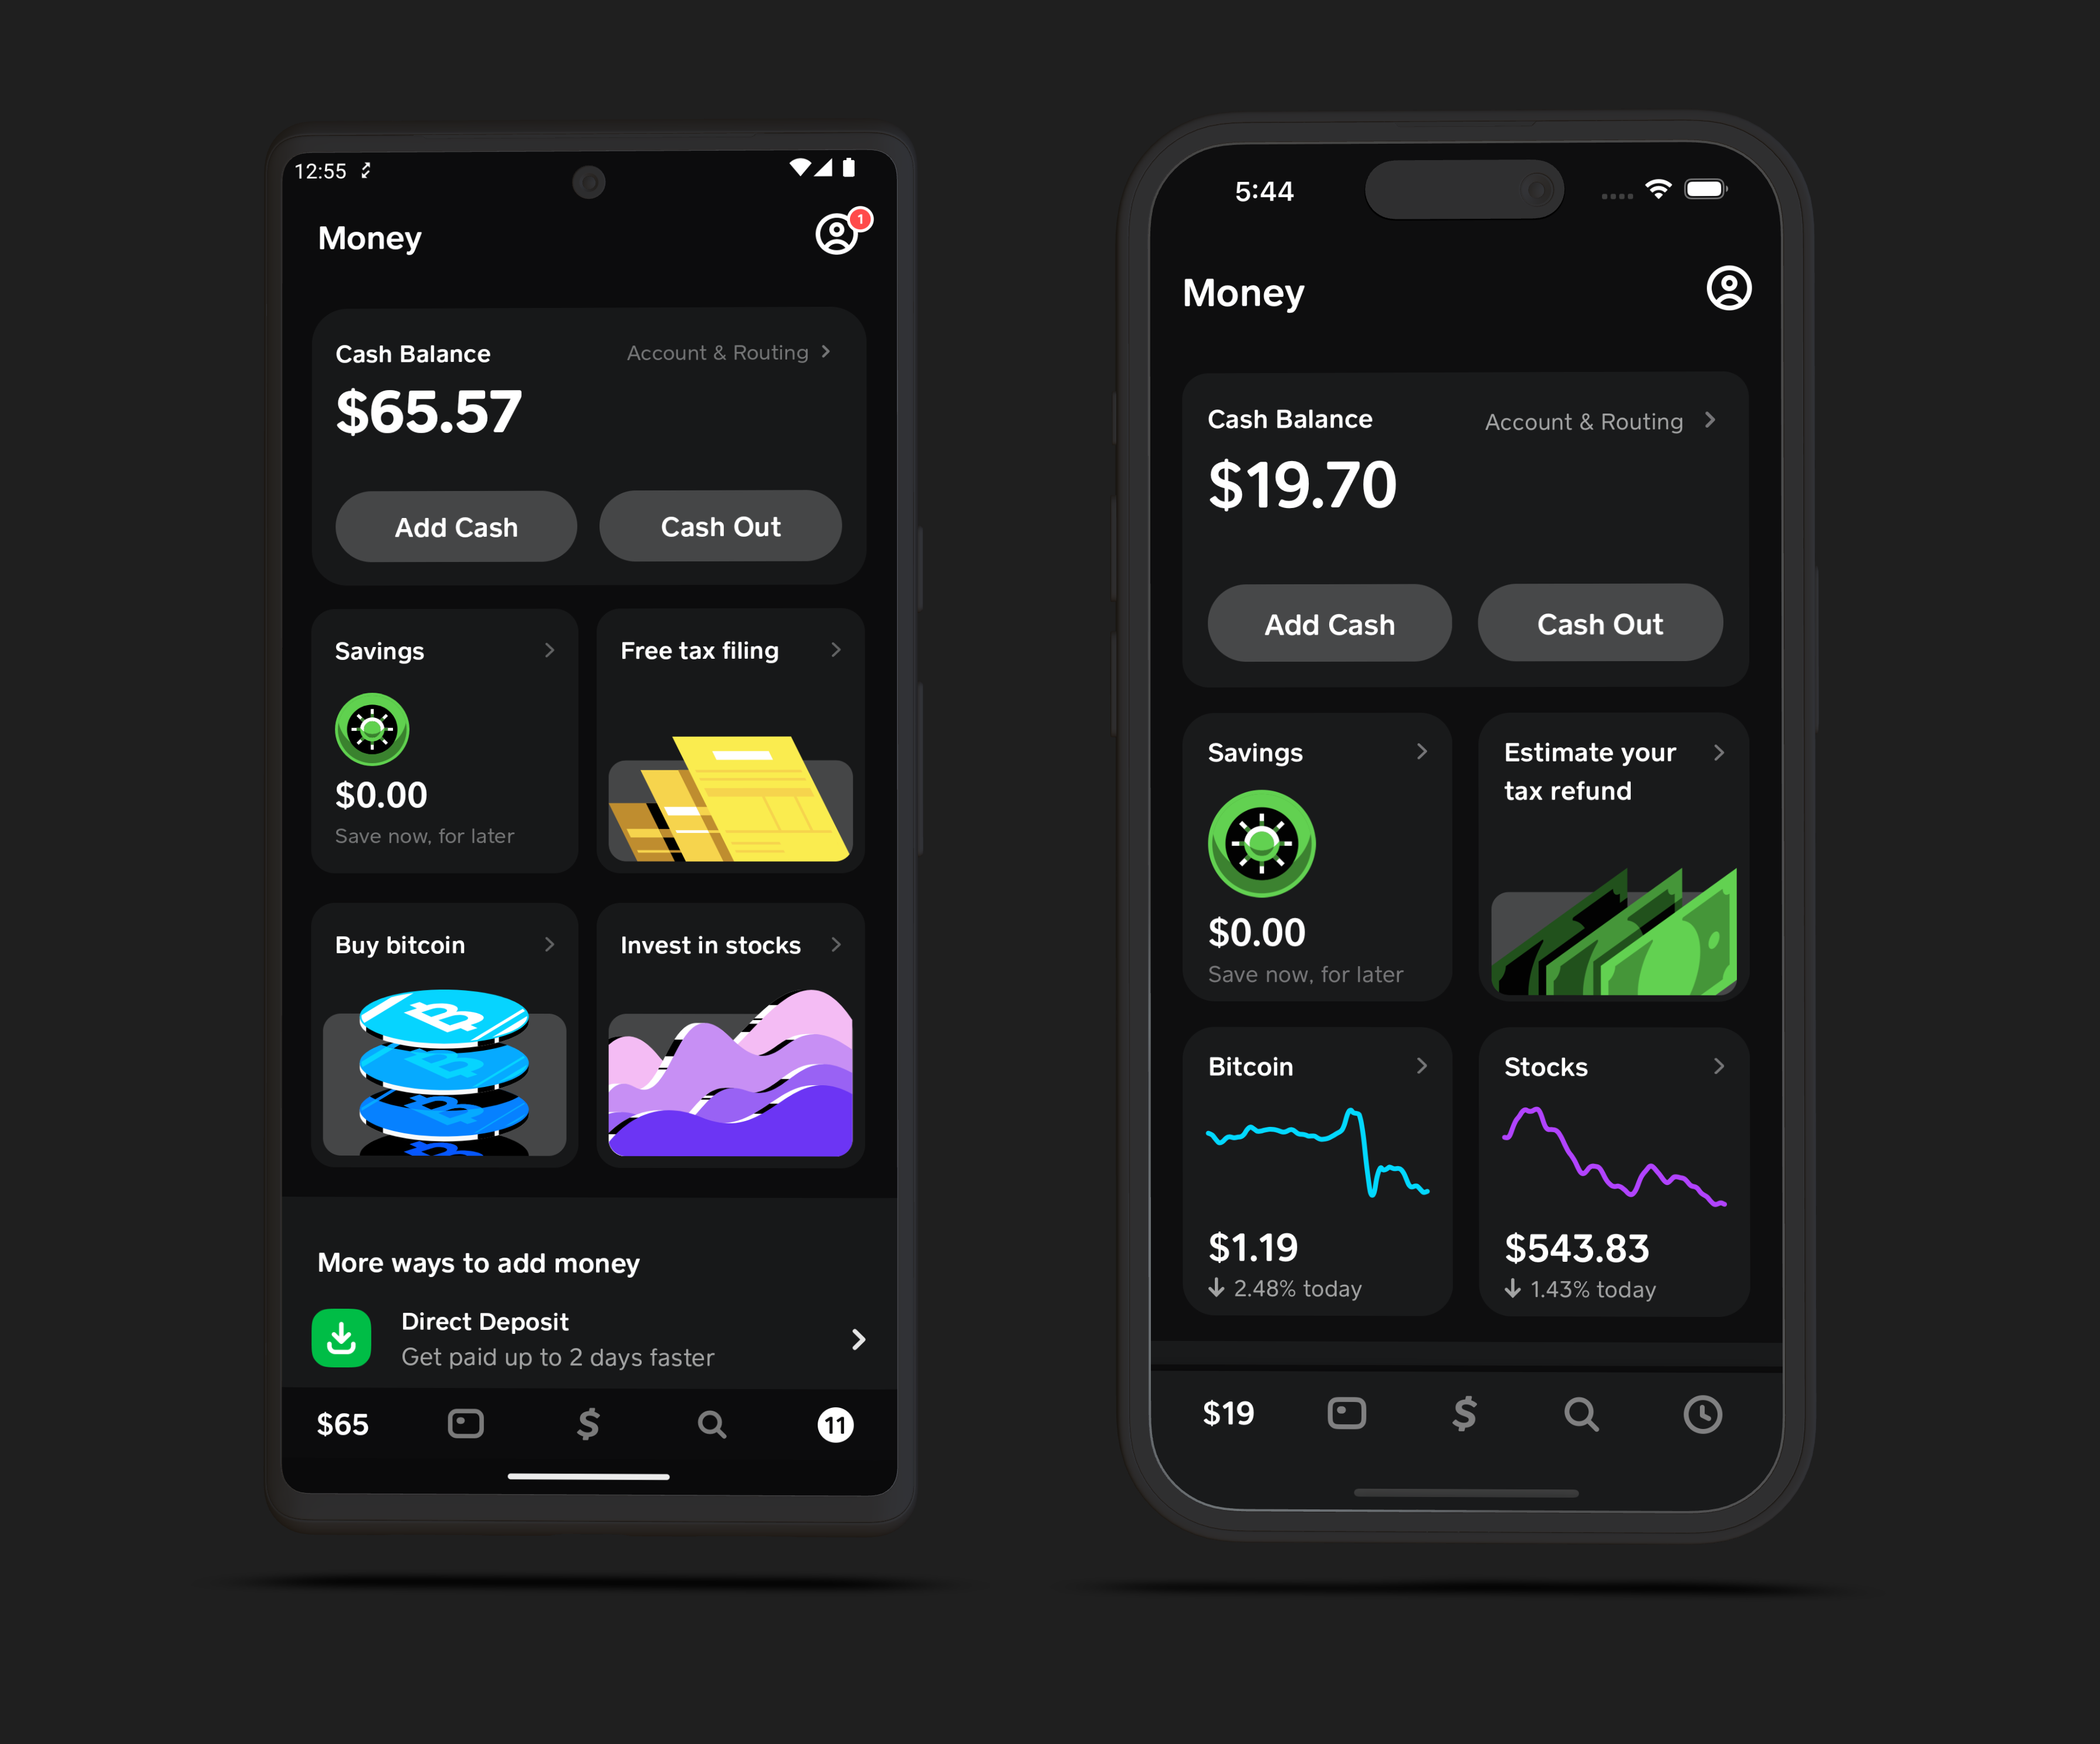 Screenshot of Cash App running on iOS and Android showing the same "Money" screen with items like a cash balance and tiles for savings, taxes, and investing